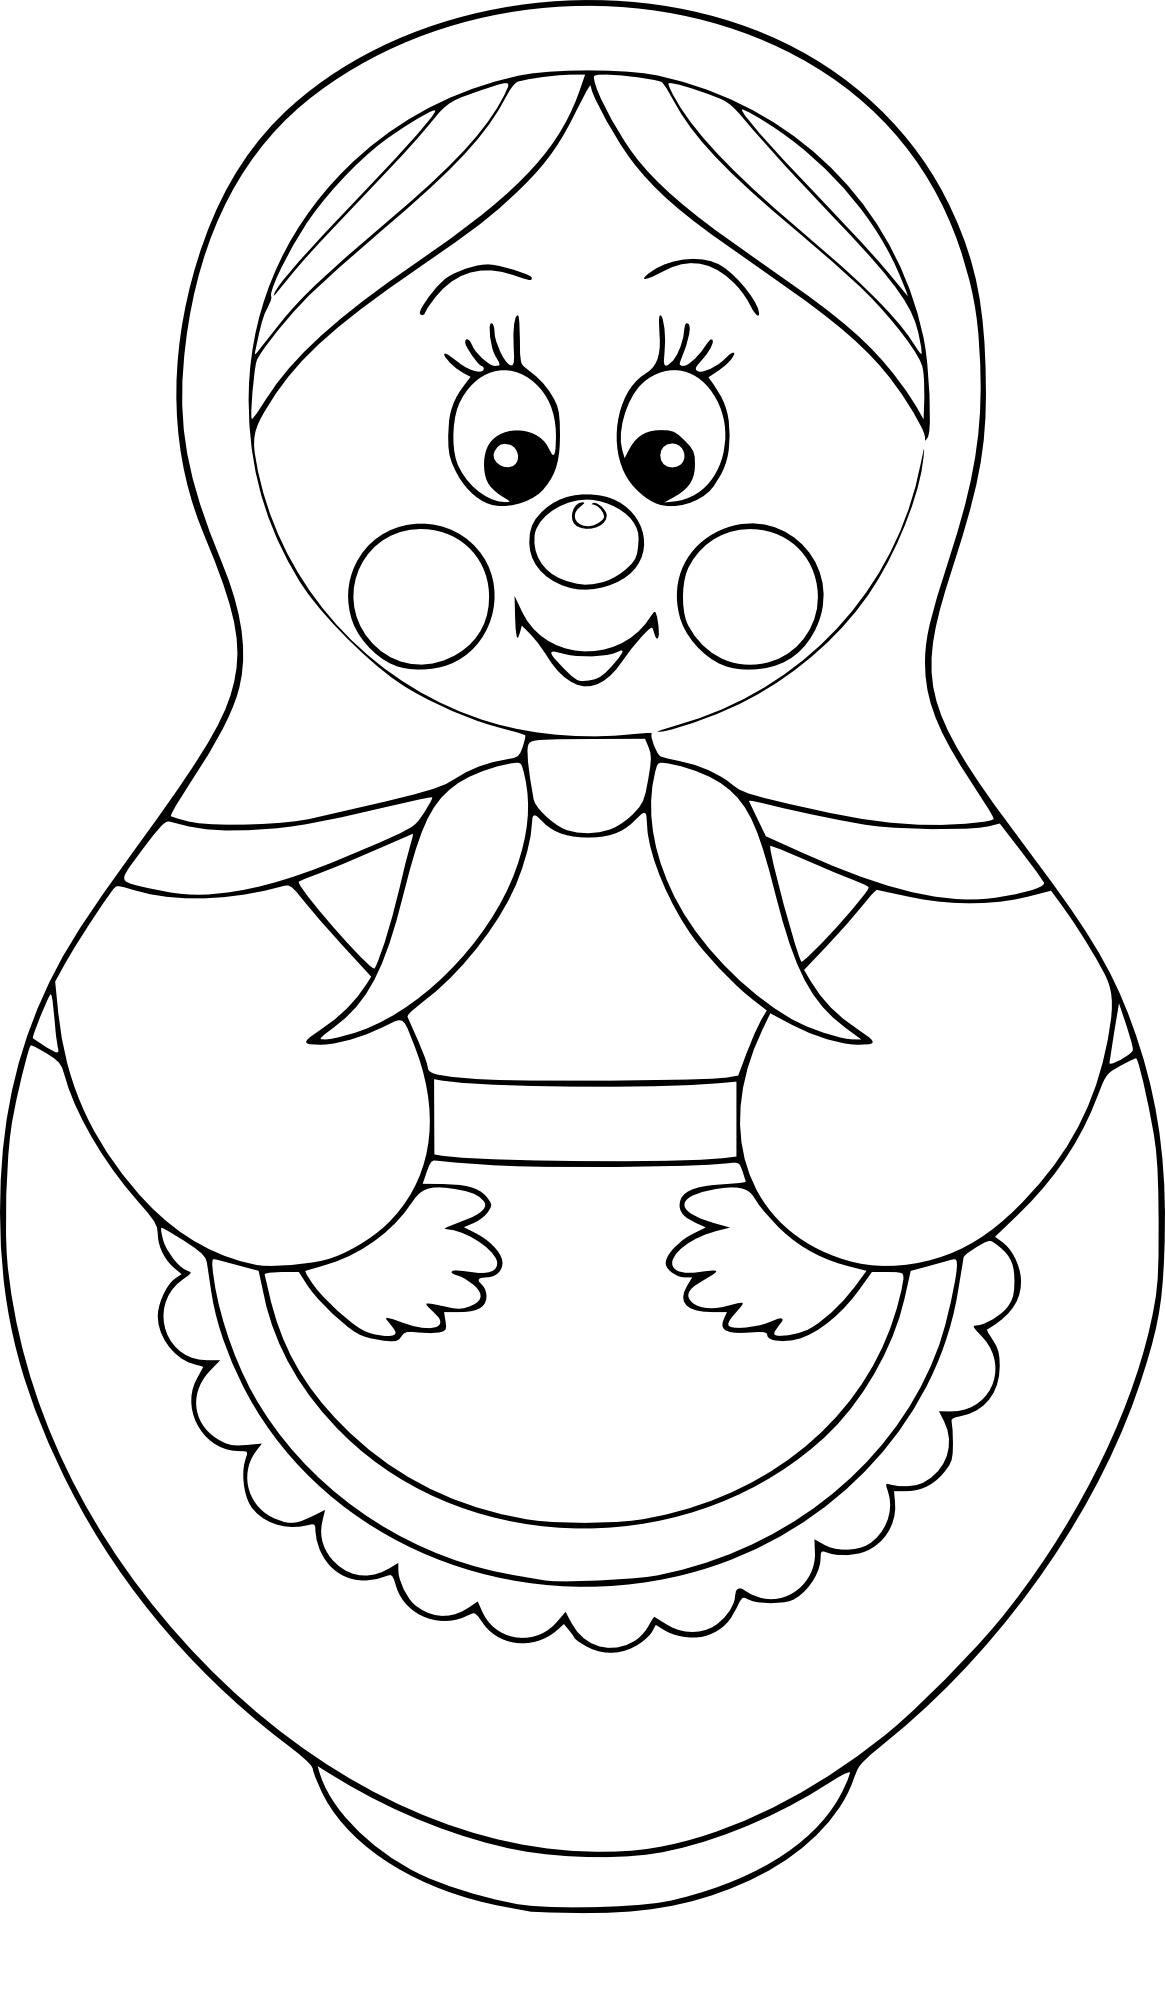 Russian Doll coloring page